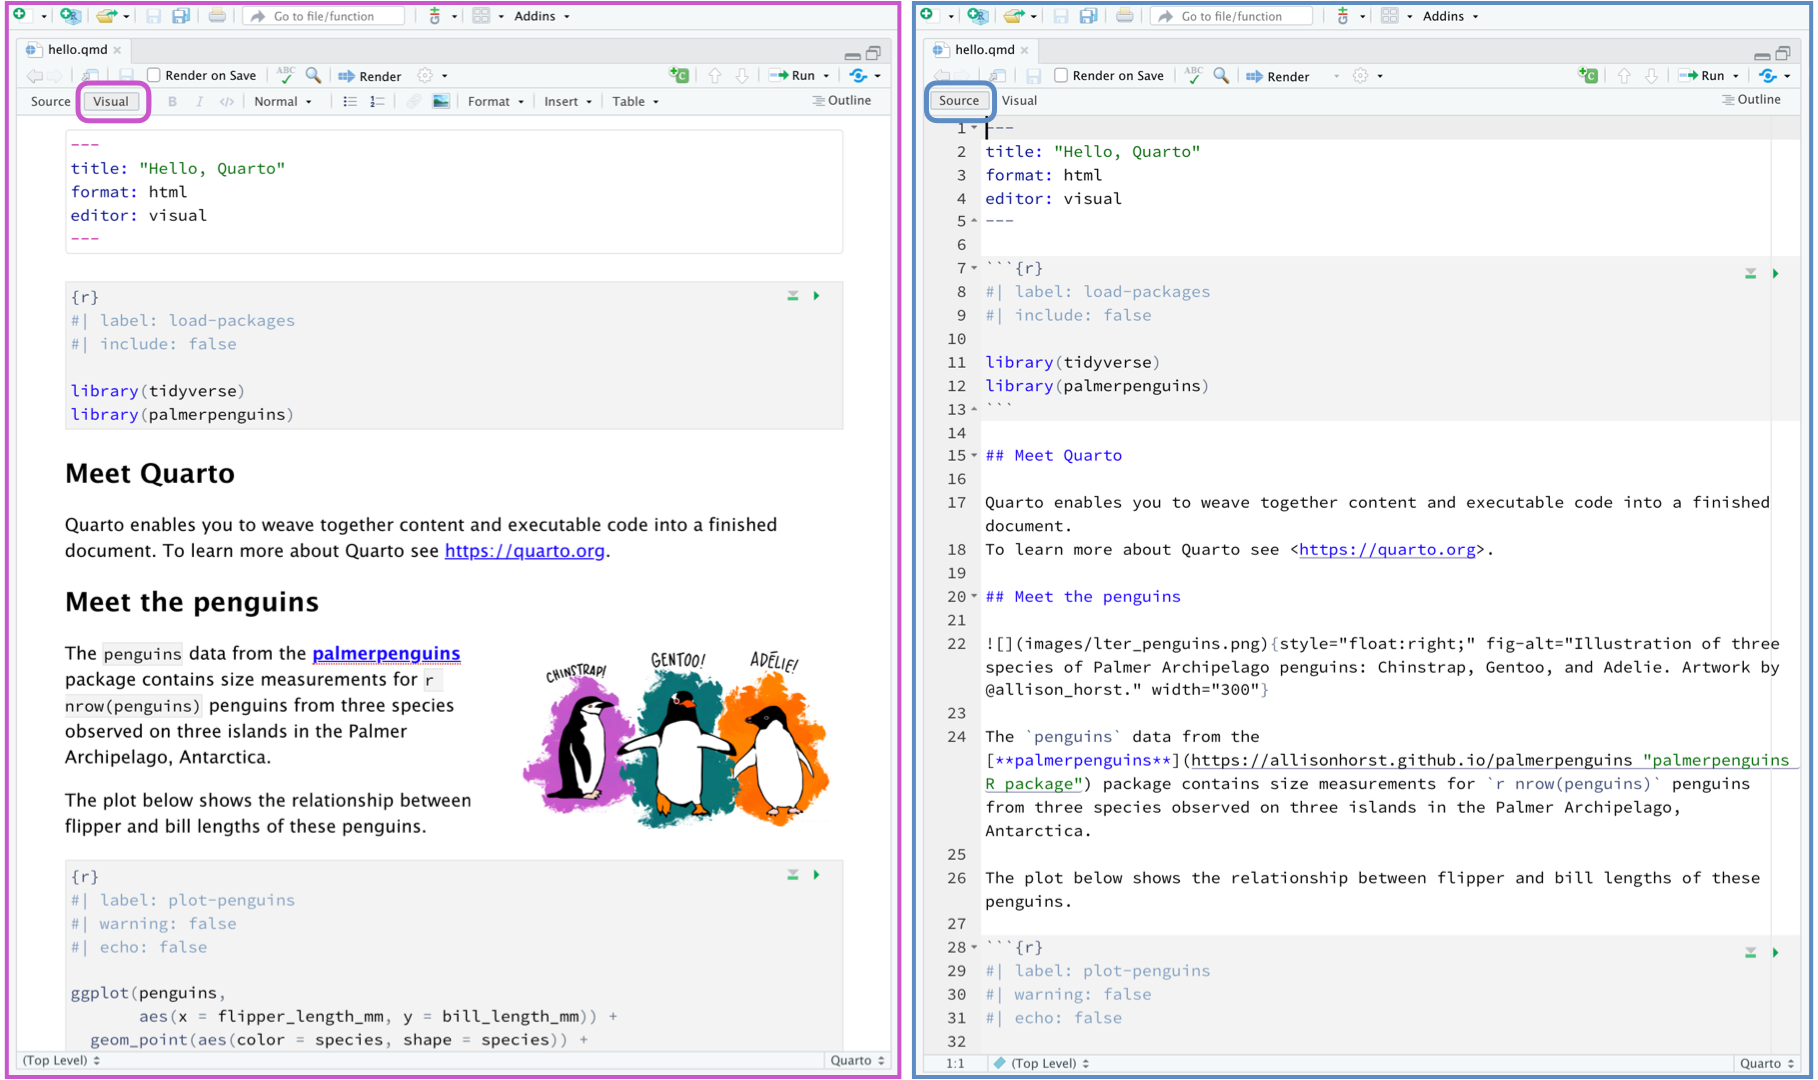 On the left: Document in the visual editor. On the right: Same document in the source editor. The visual/source editor toggle is highlighted in both documents marking their current state. The document shown is the "Hello Quarto" document from a previous image on the page.